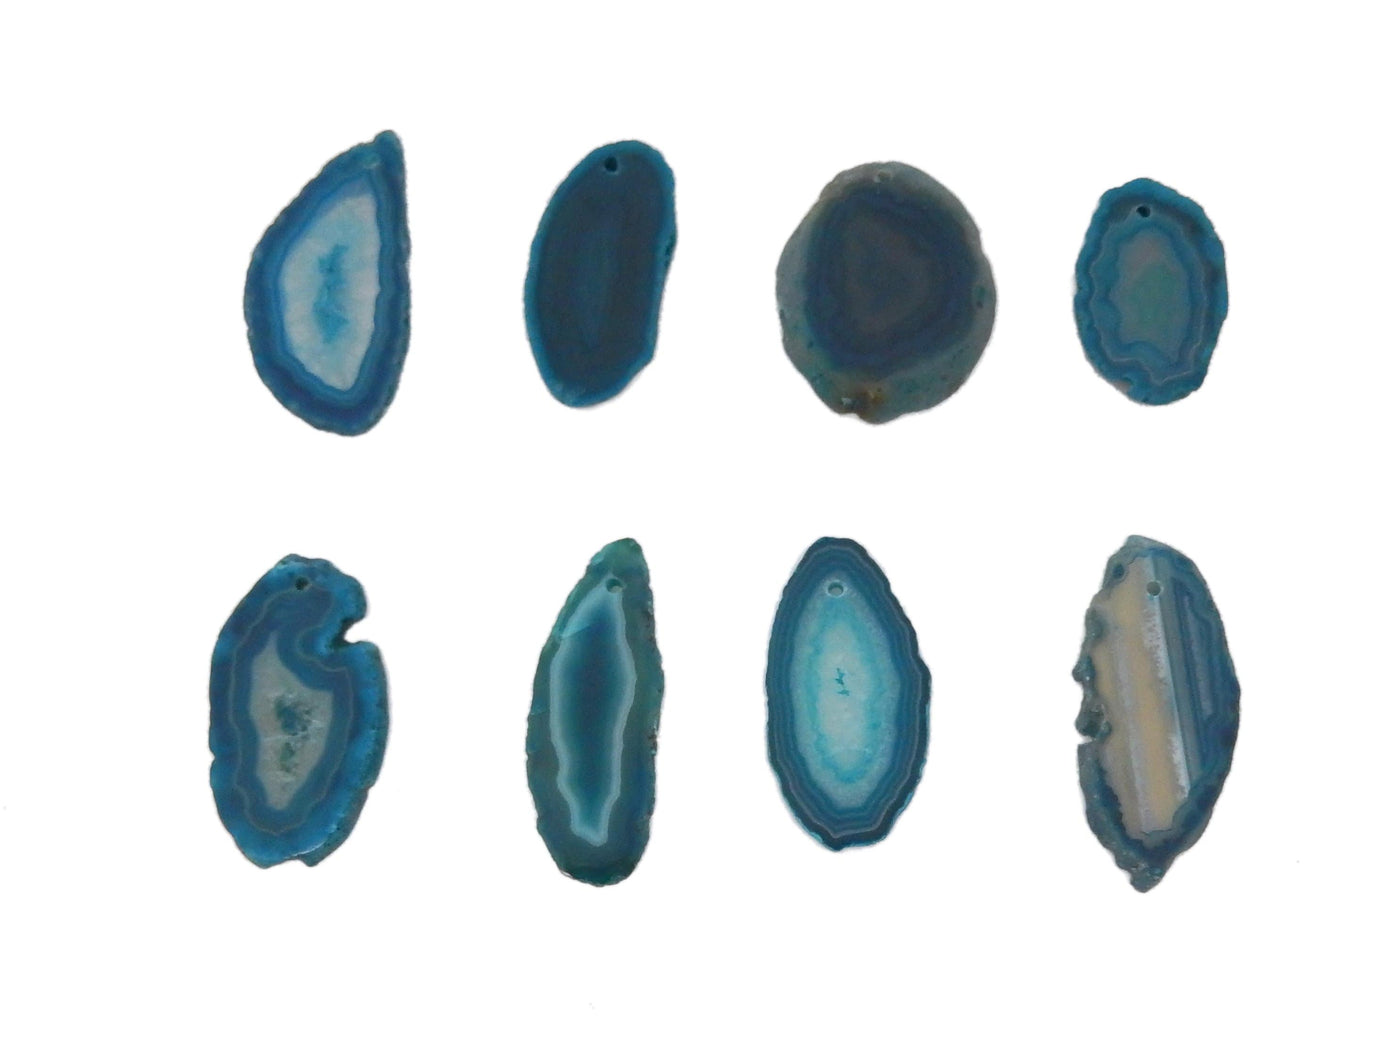 8 Teal Agate Slices Drilled on White Background.